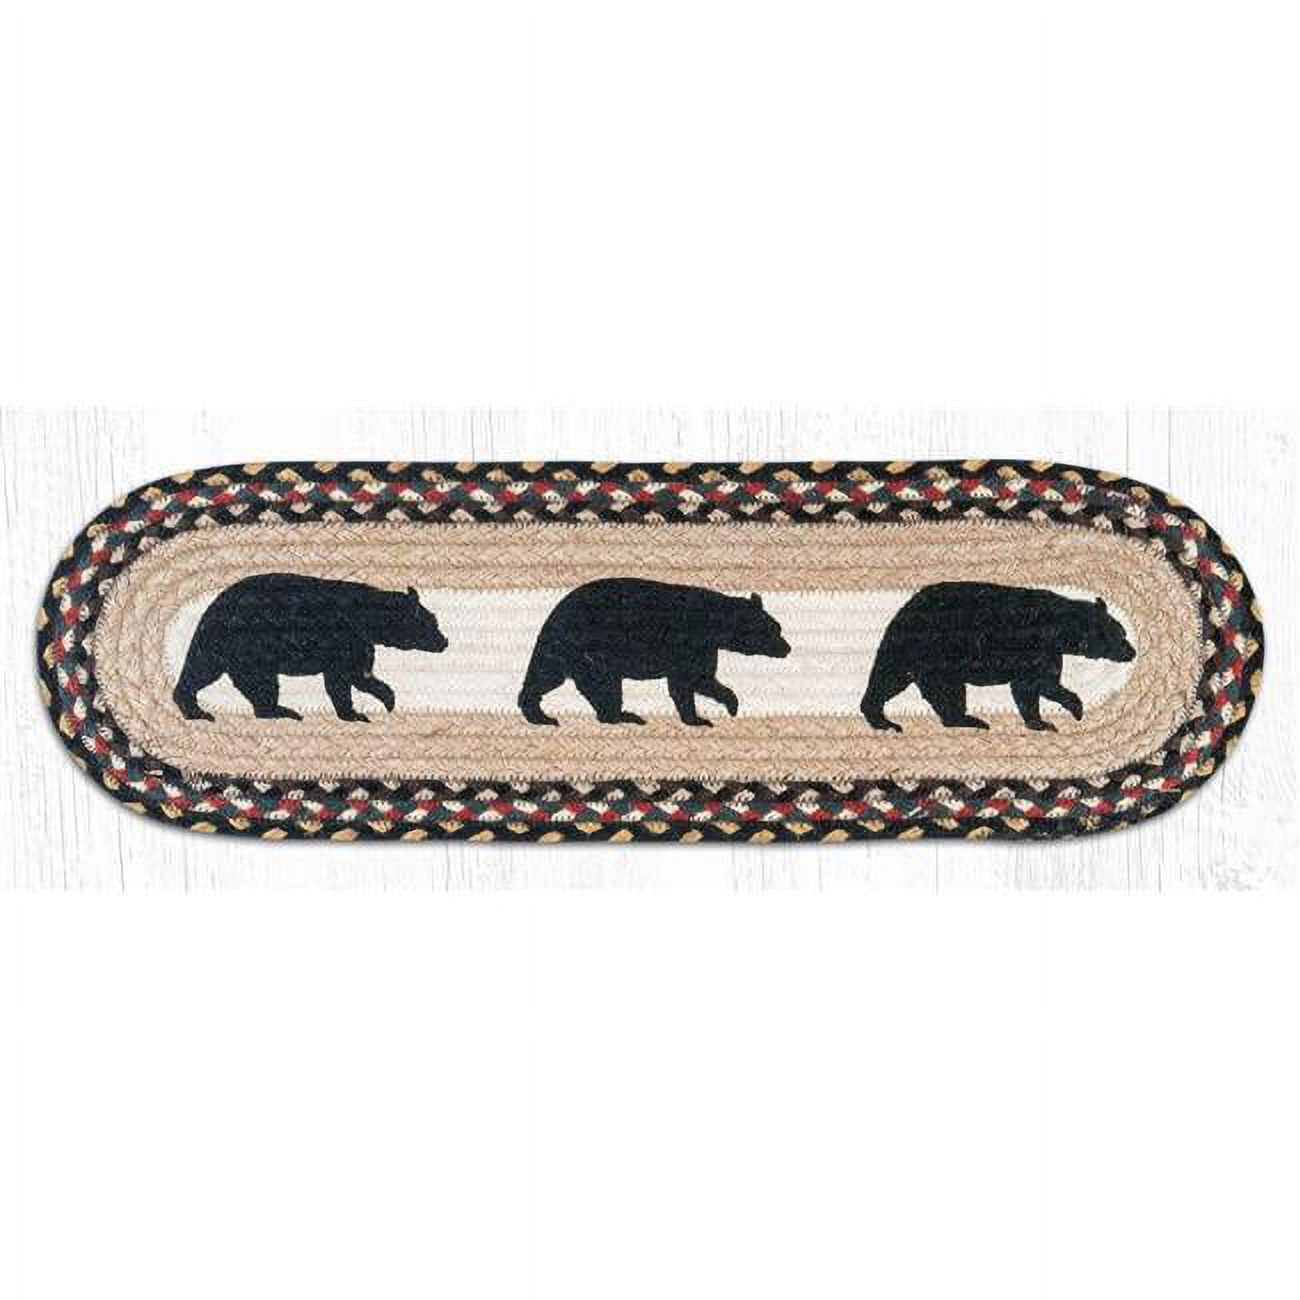 Capitol Importing 49-st043ab 27 X 8.25 In. Jute Oval American Bears Stair Tread